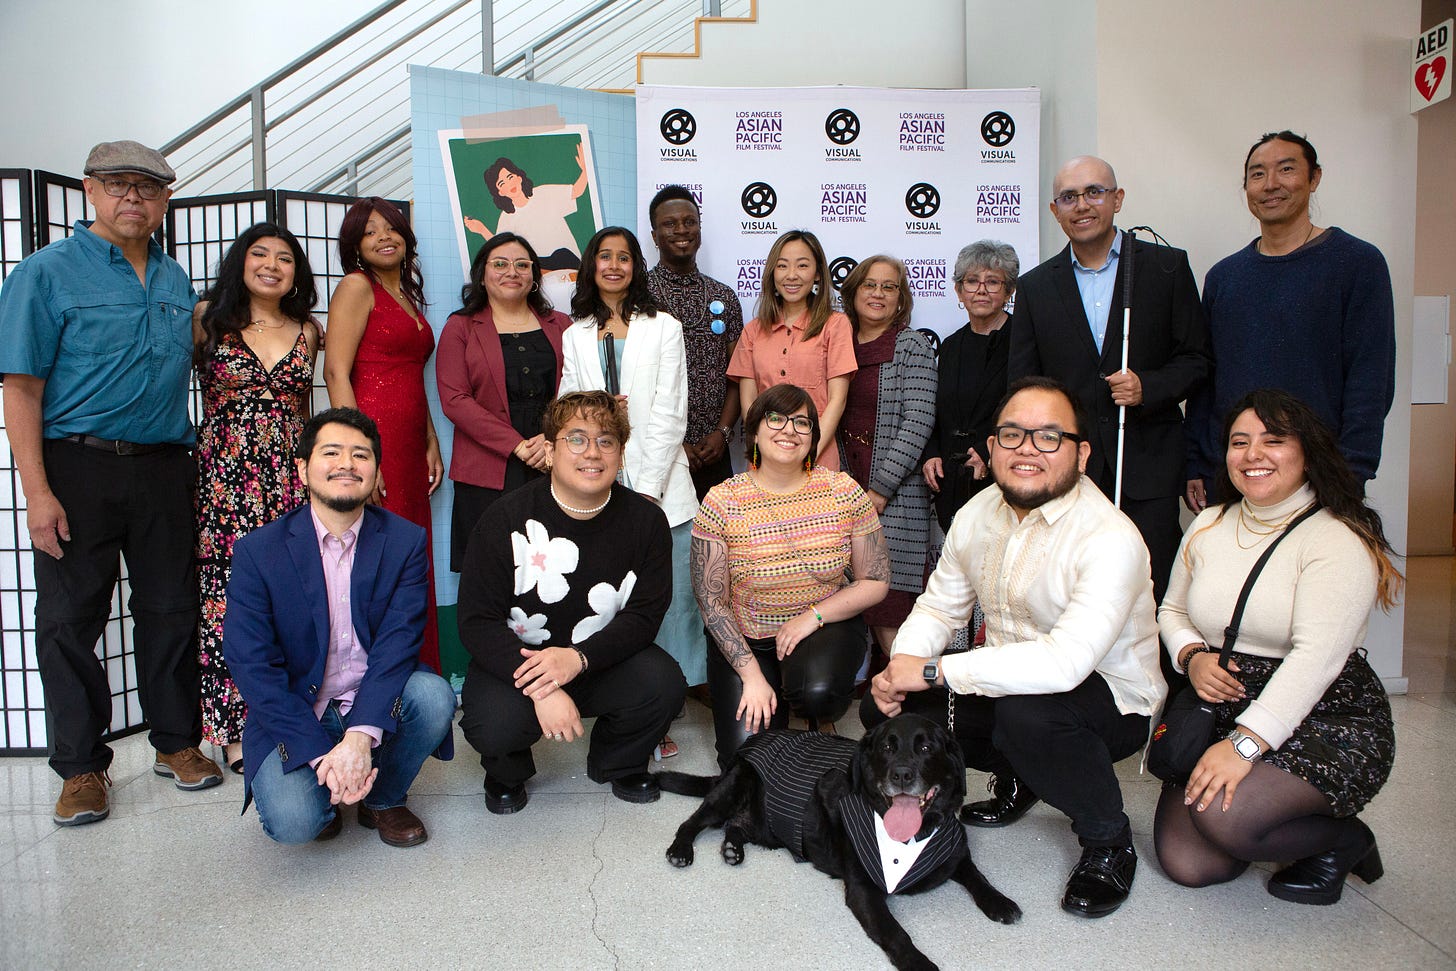  A multiracial and intergenerational group of people pose for the camera in two rows in front of signage for a film festival. 11 people on the back row are standing. 5 people (and a black Labrador) squat on the front row.